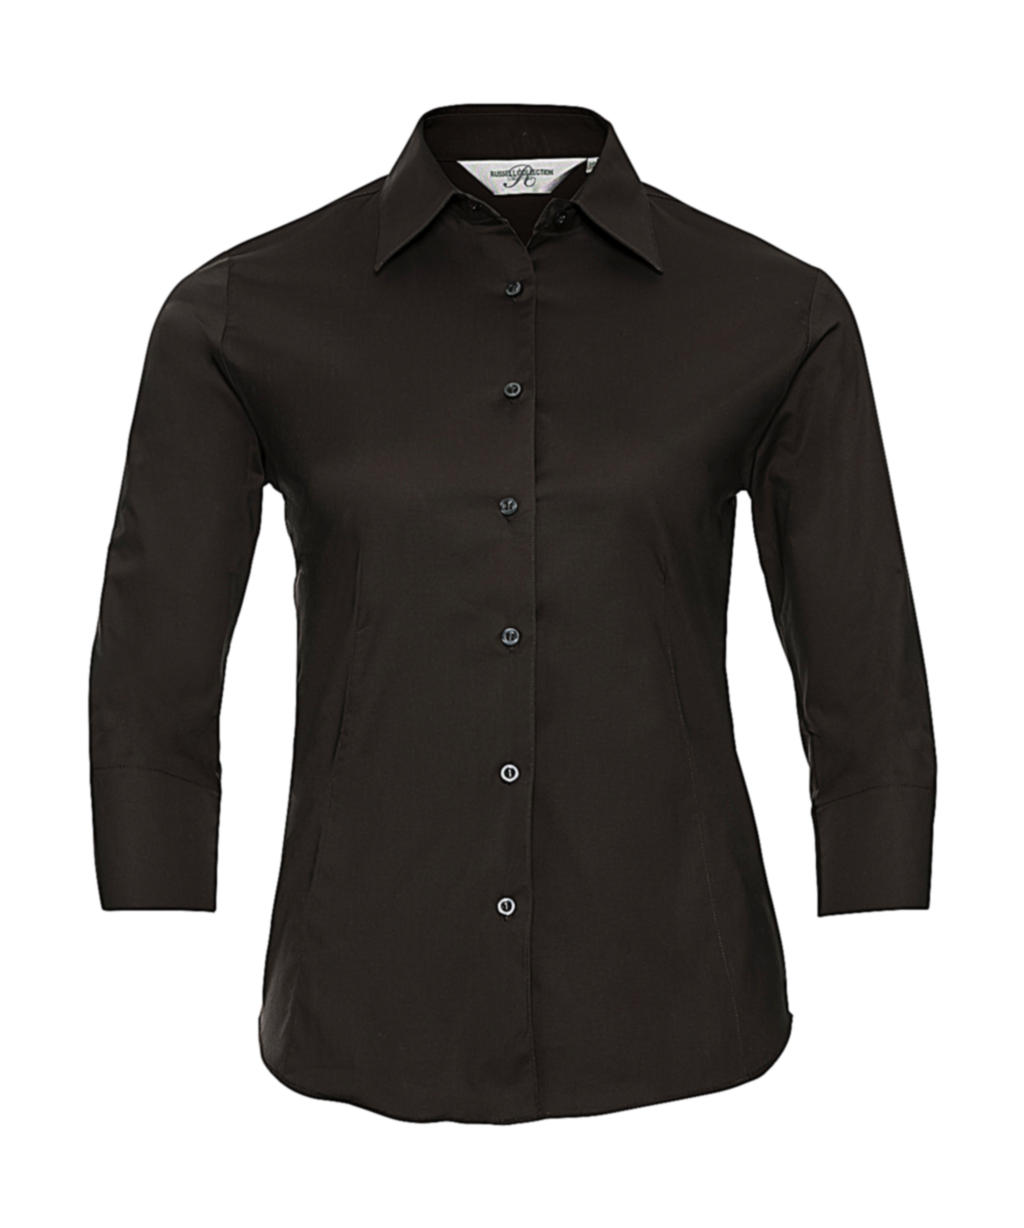  Ladies 3/4 Sleeve Easy Care Fitted Shirt in Farbe Chocolate